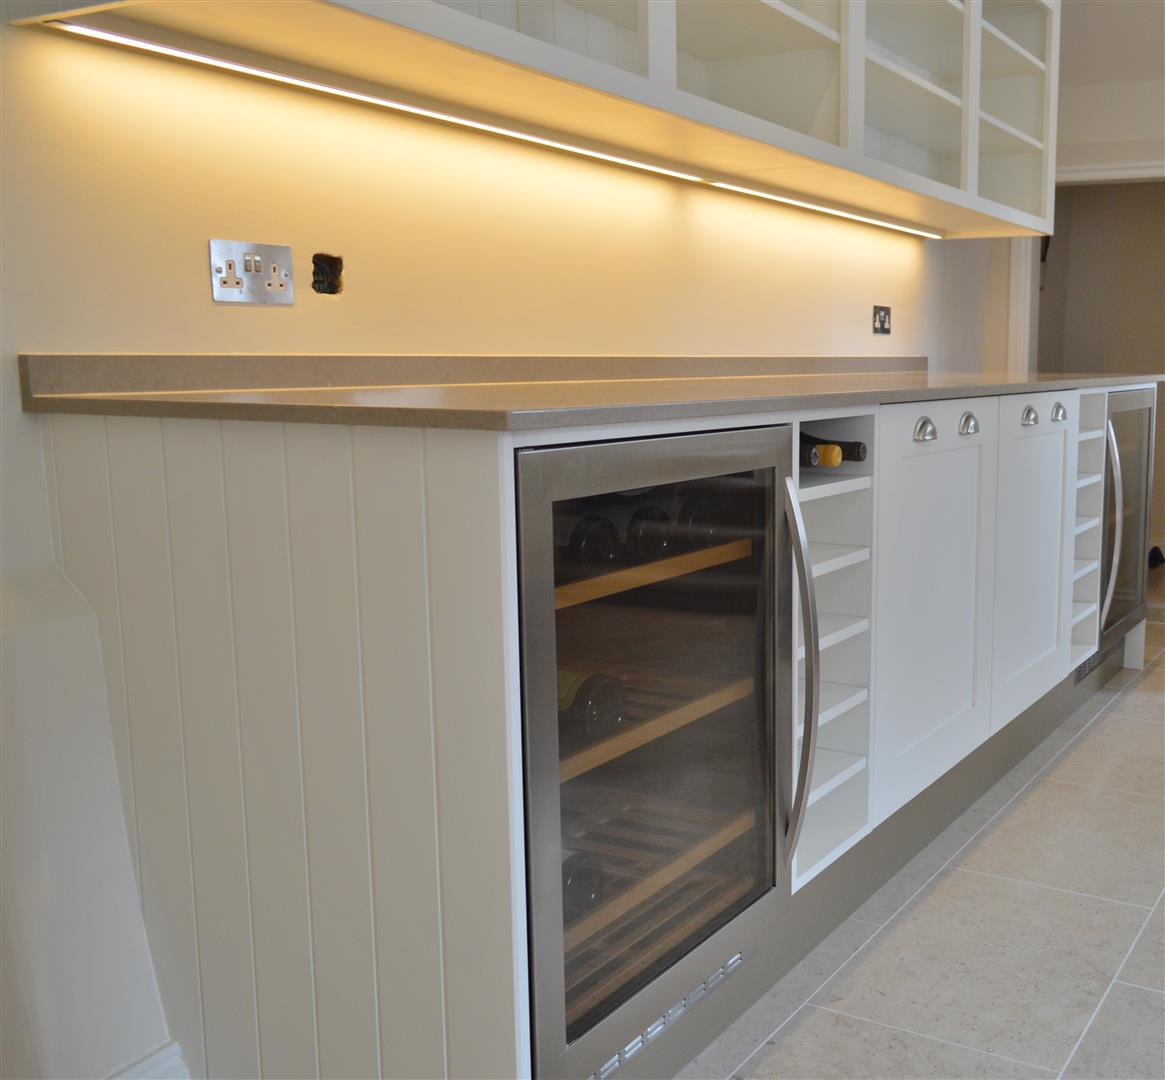 Redbrook kitchens design and install bespoke kitchens in Gloucestershire Wine rack and cooler